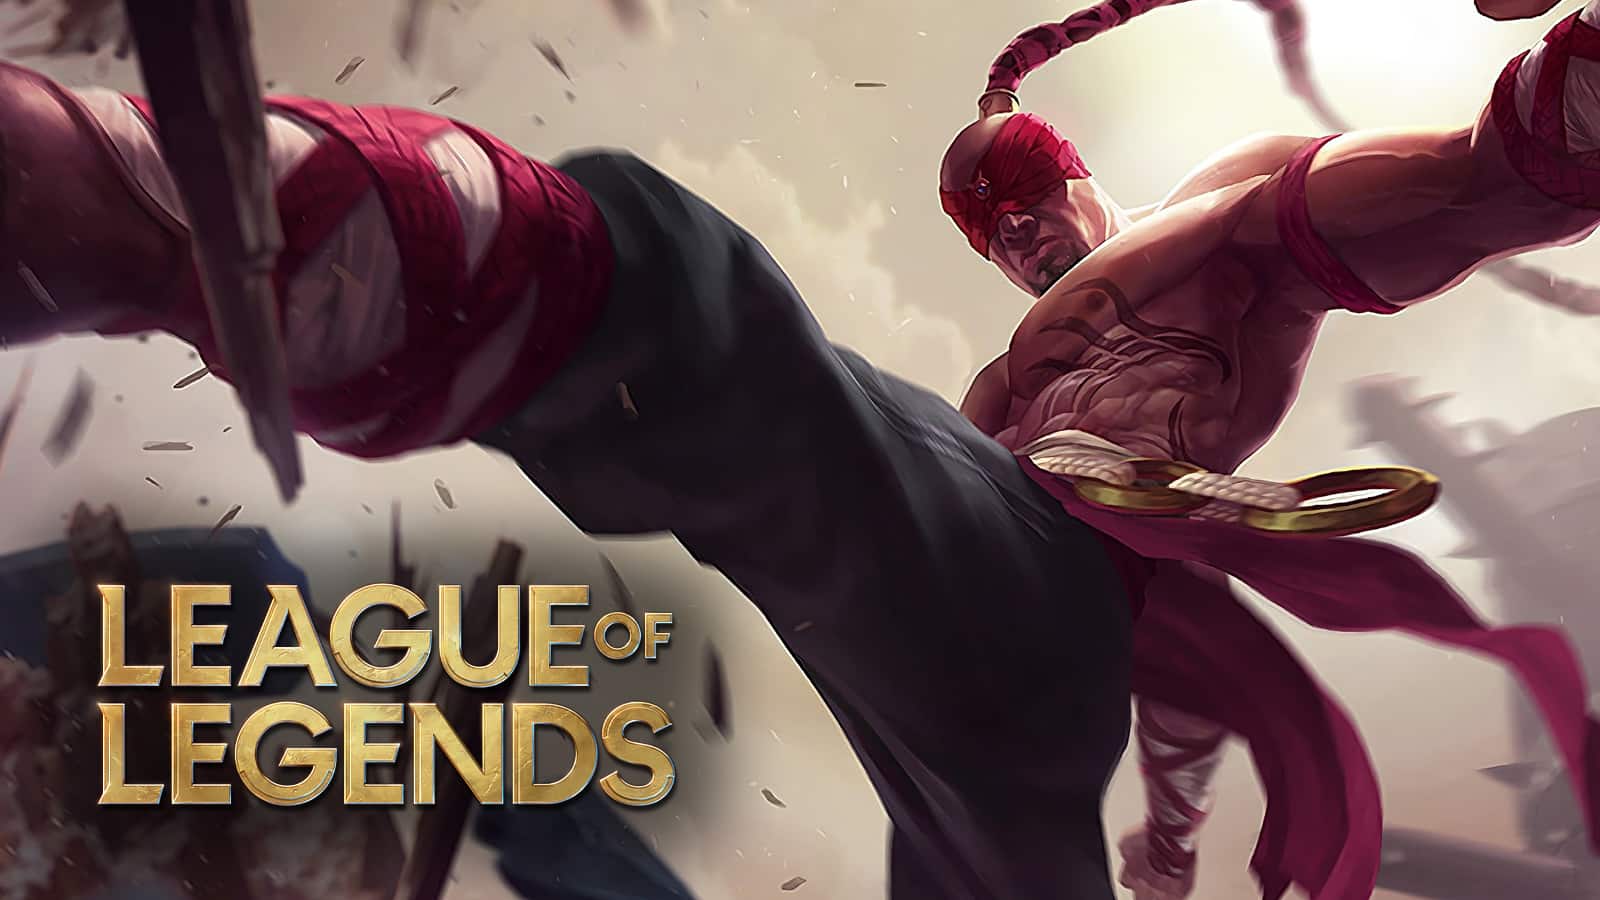 Lee Sin Build - Highest Win Rate Builds, Runes, and Items